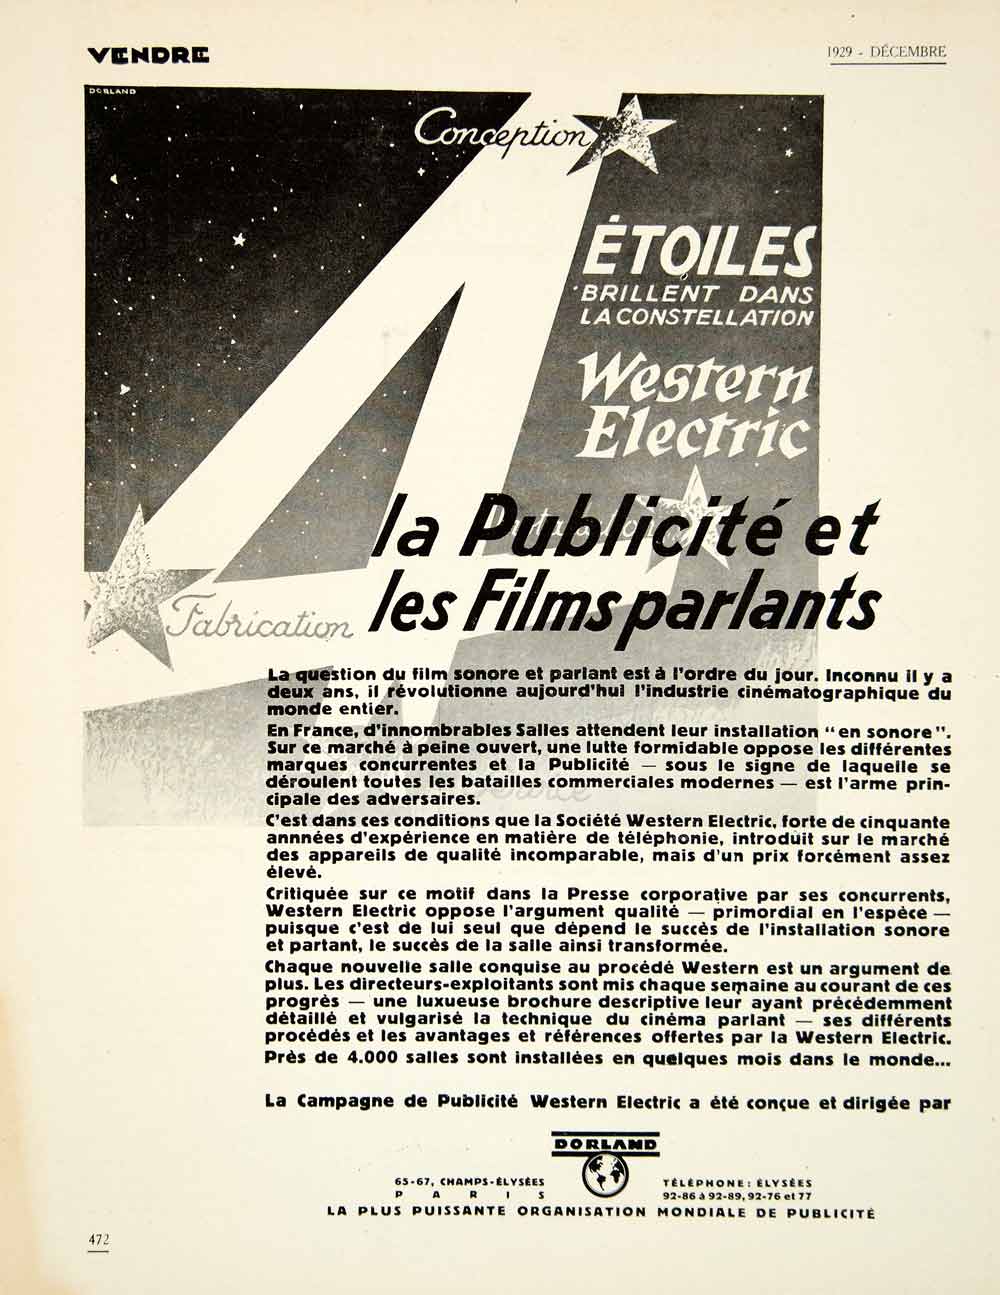 1929 Ad Dorland Western Electric Advertising Agency Talking Pictures Star VENA3